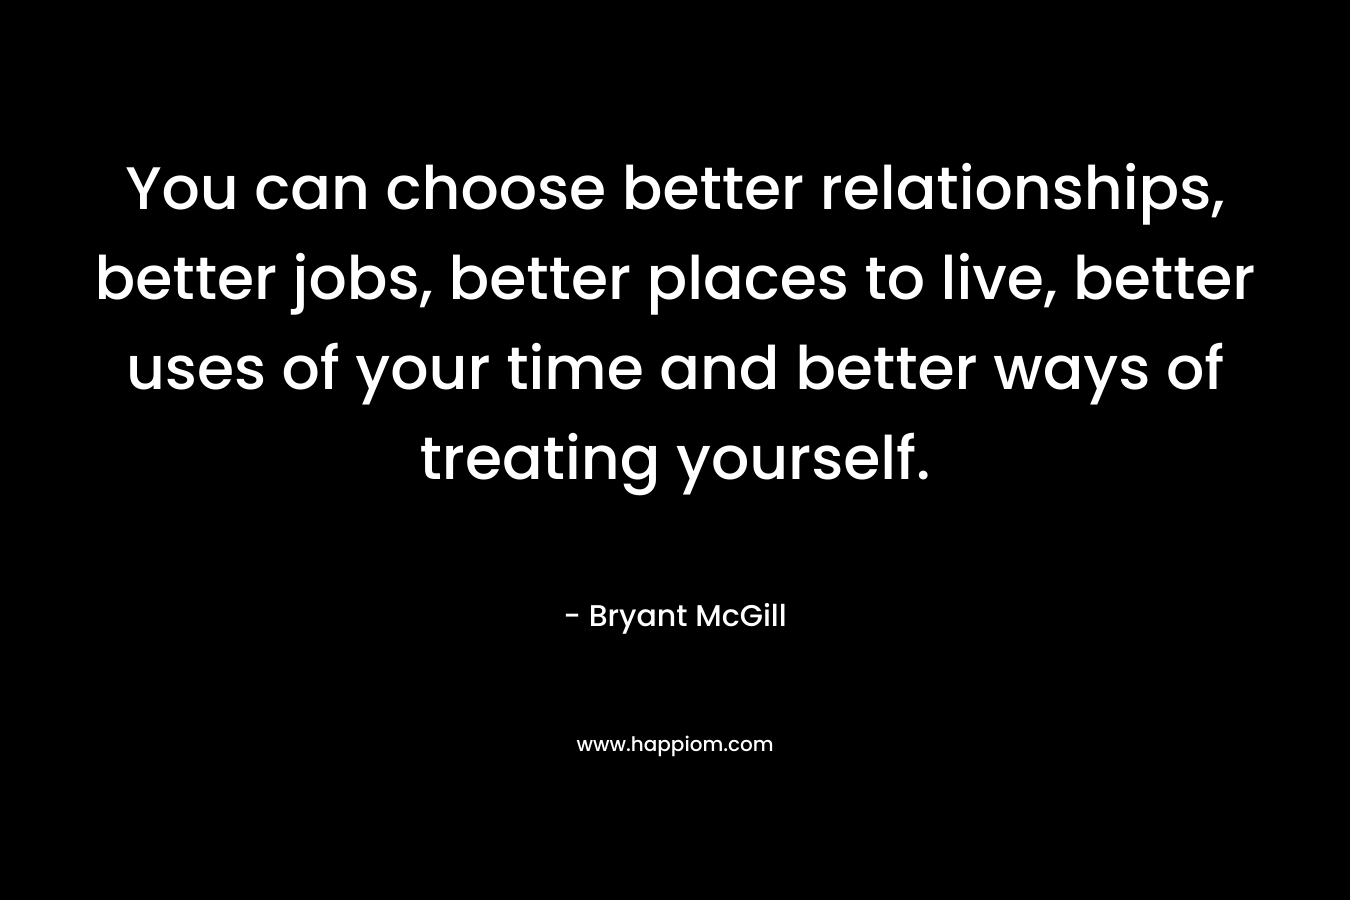 You can choose better relationships, better jobs, better places to live, better uses of your time and better ways of treating yourself.